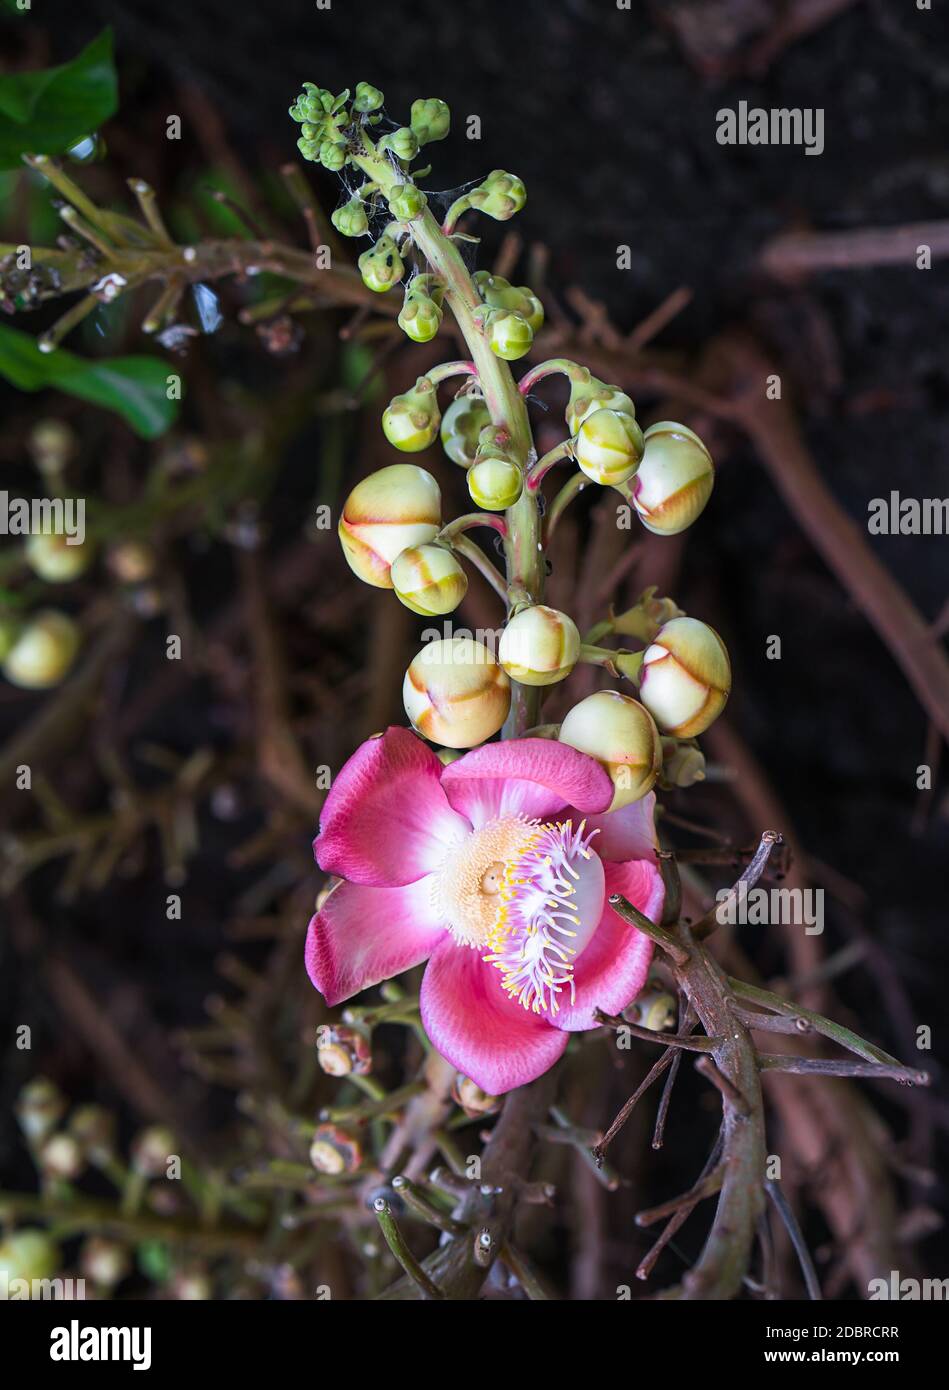 Close-up of Shorea robusta or Cannonball flower (Couroupita guianensis) on the tree Stock Photo